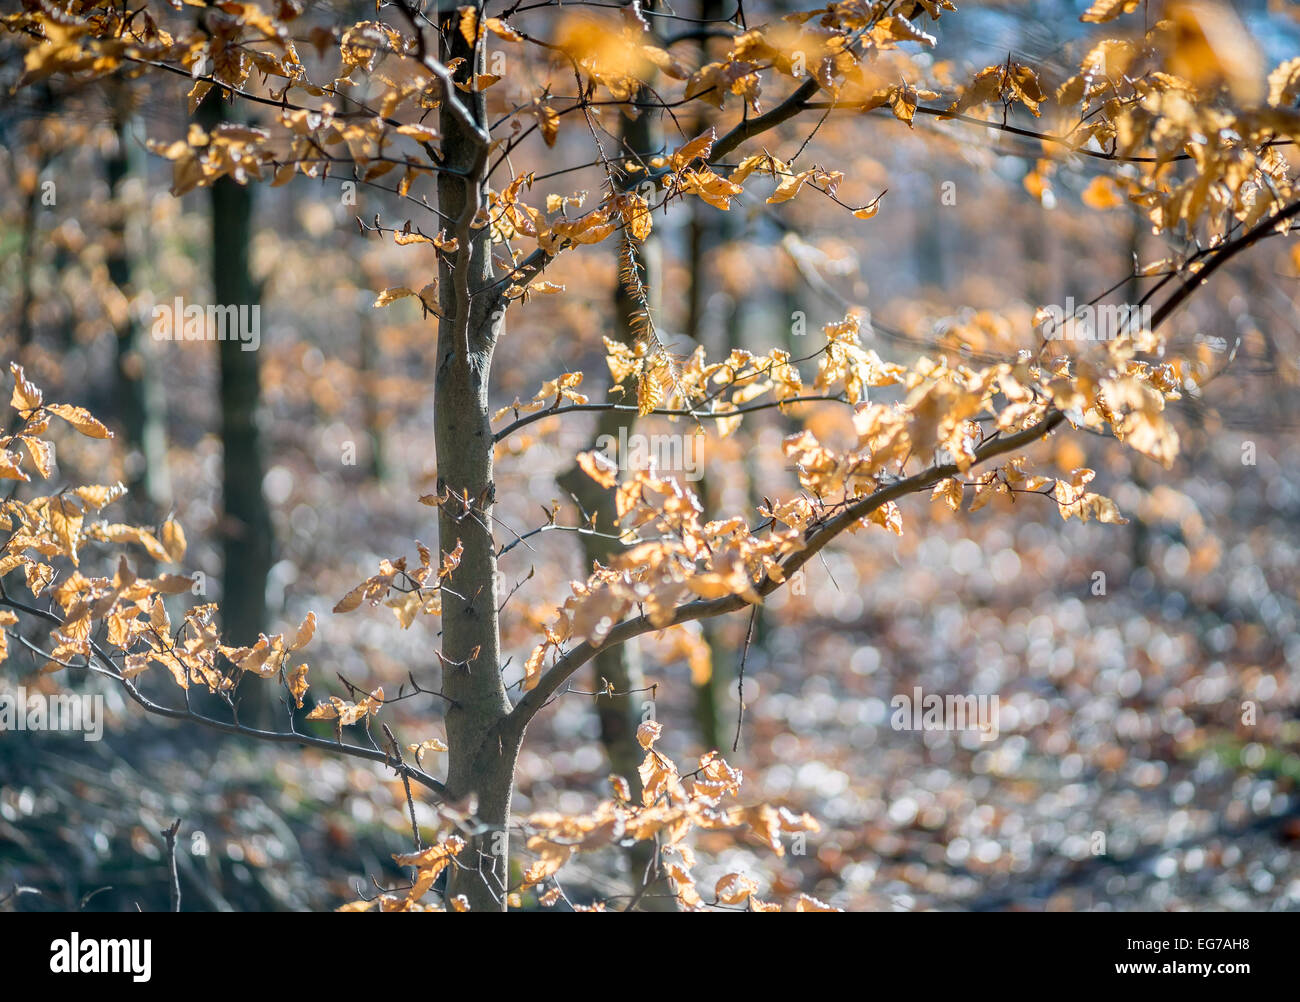 Wither beech tree leaves lit by winter sun Stock Photo